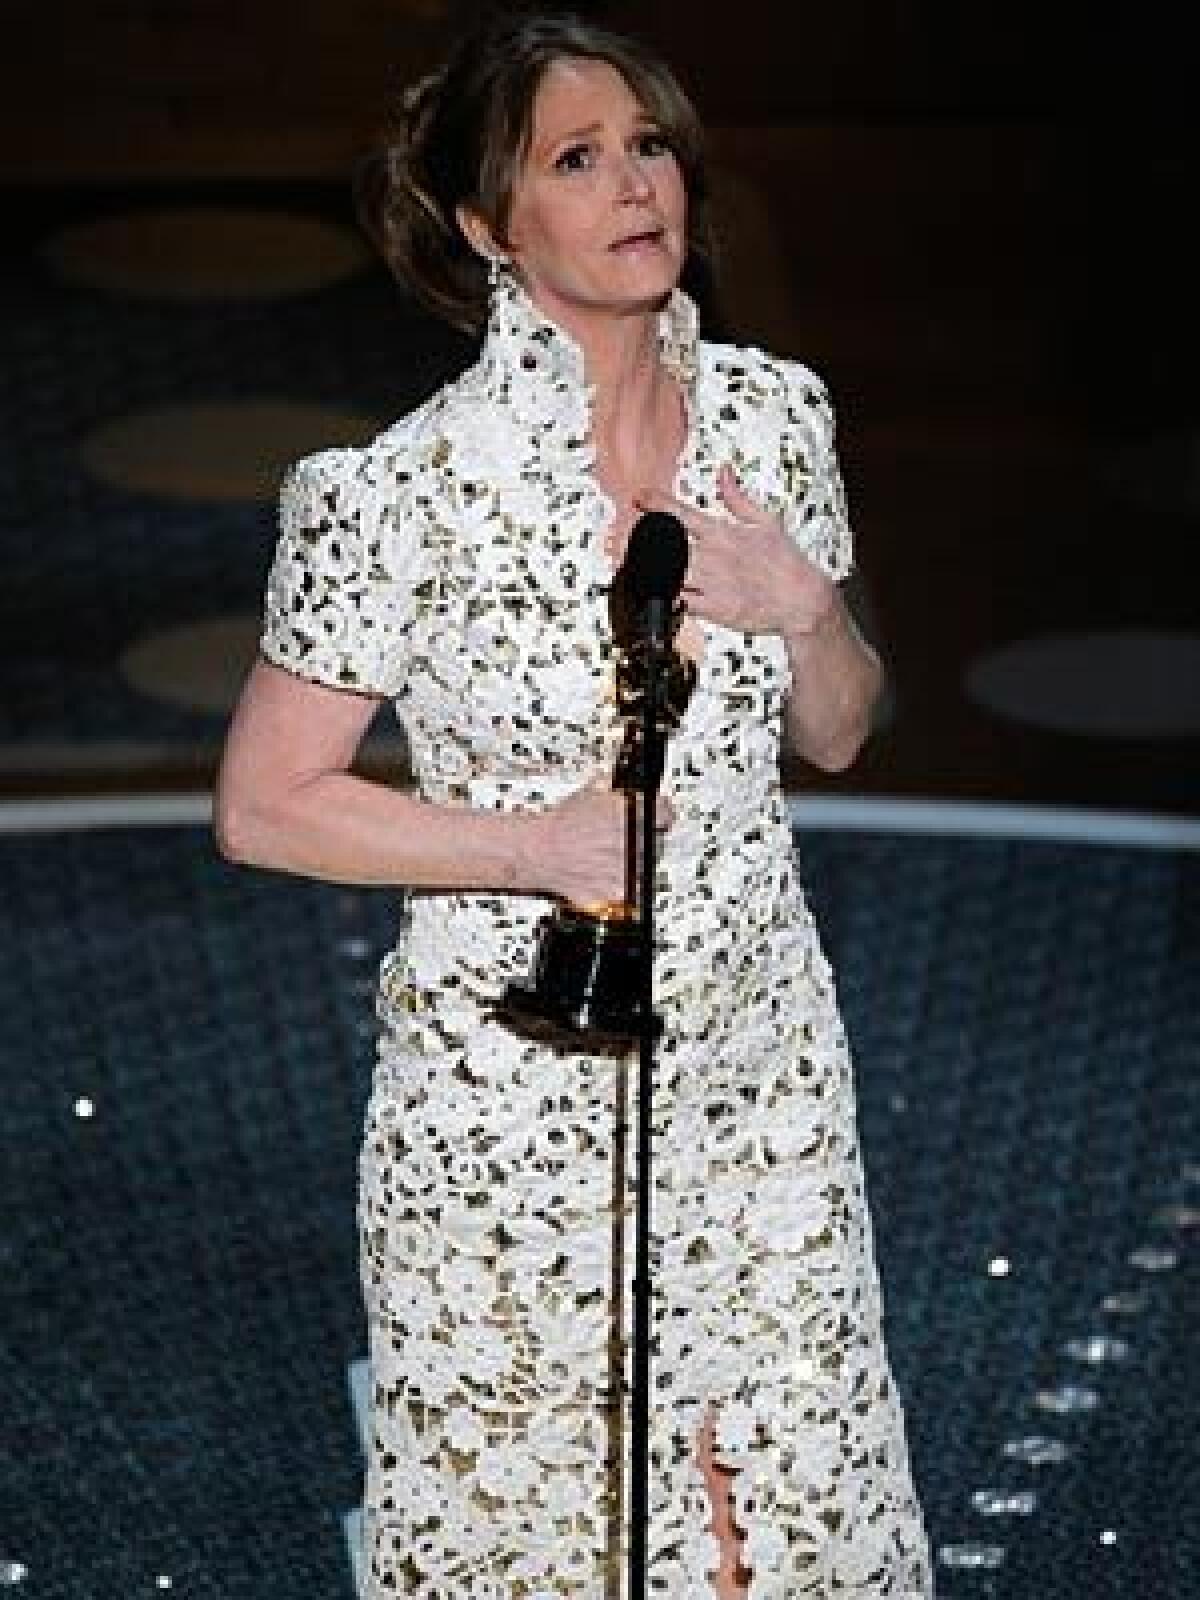 Melissa Leo wins the supporting actress award for her role in "The Fighter."